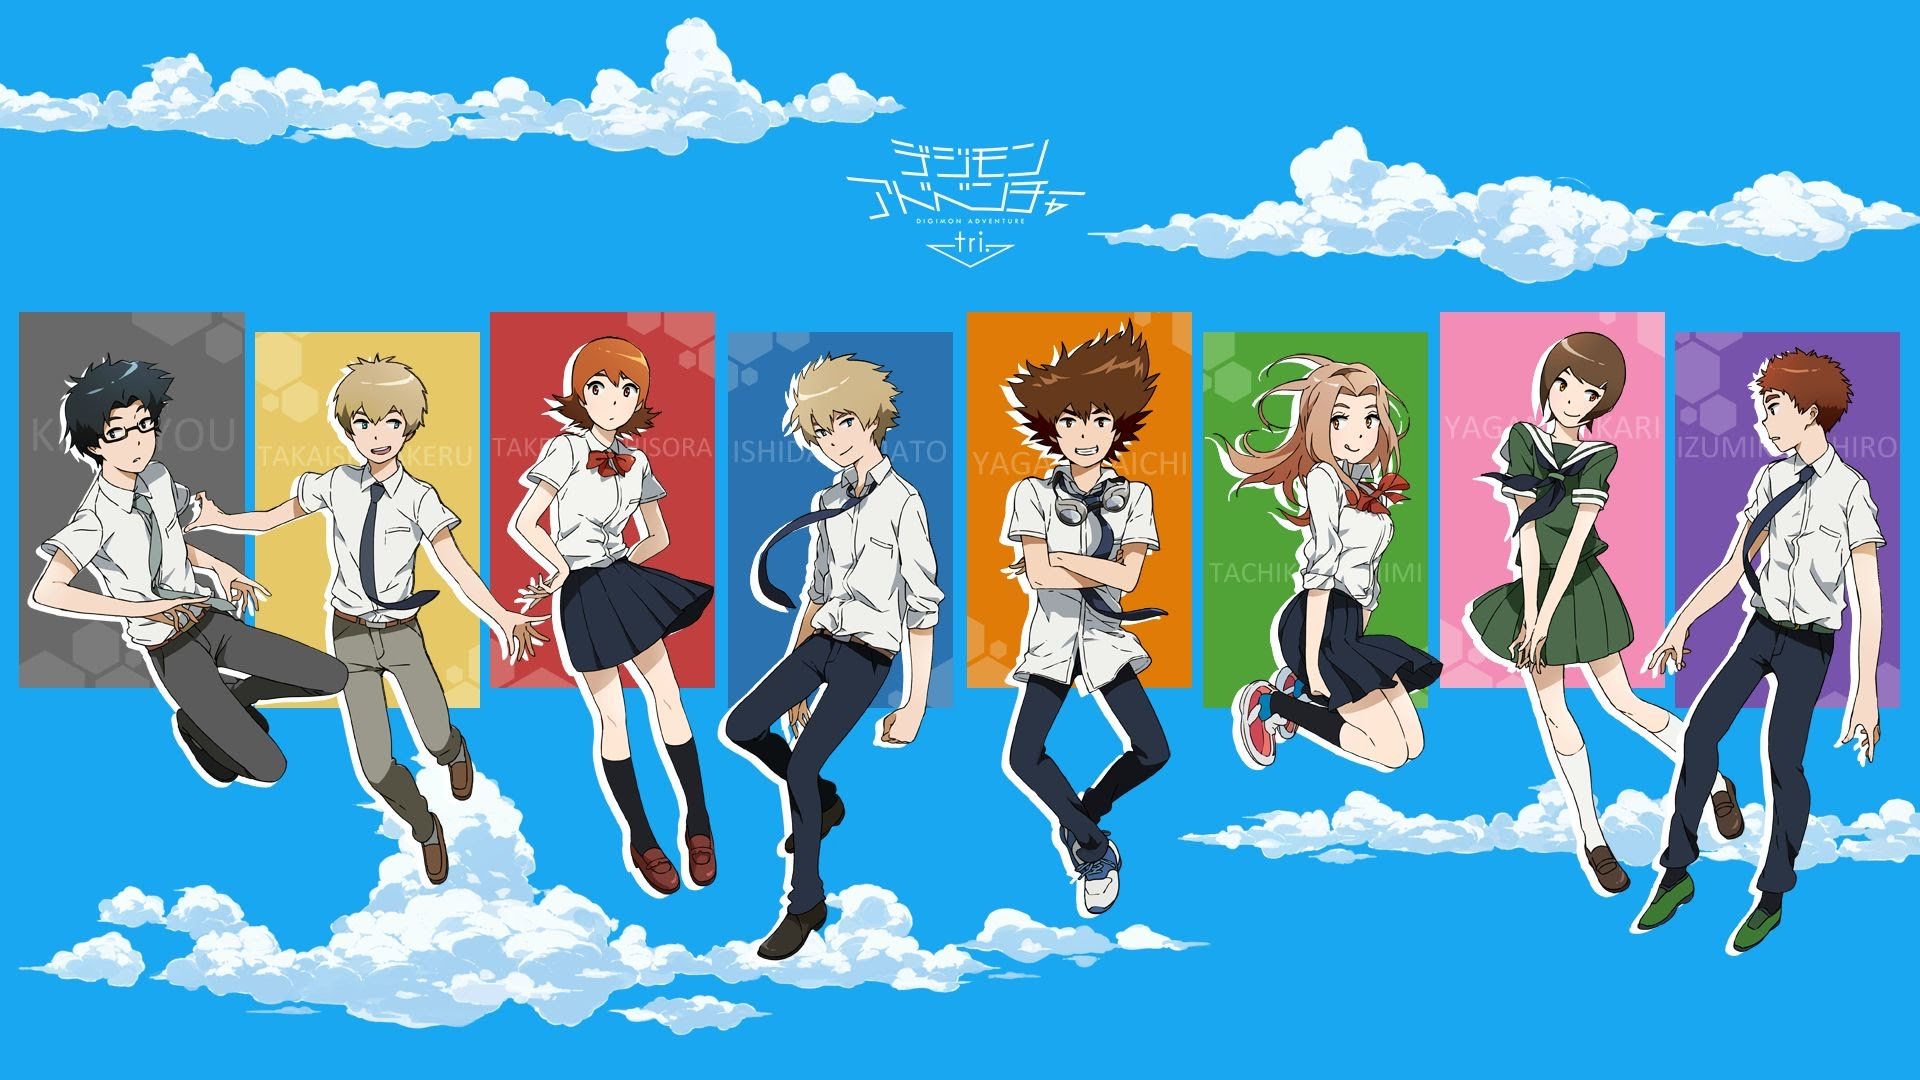 Digimon Adventure tri. The Movie Chapter 5: Coexistence Review